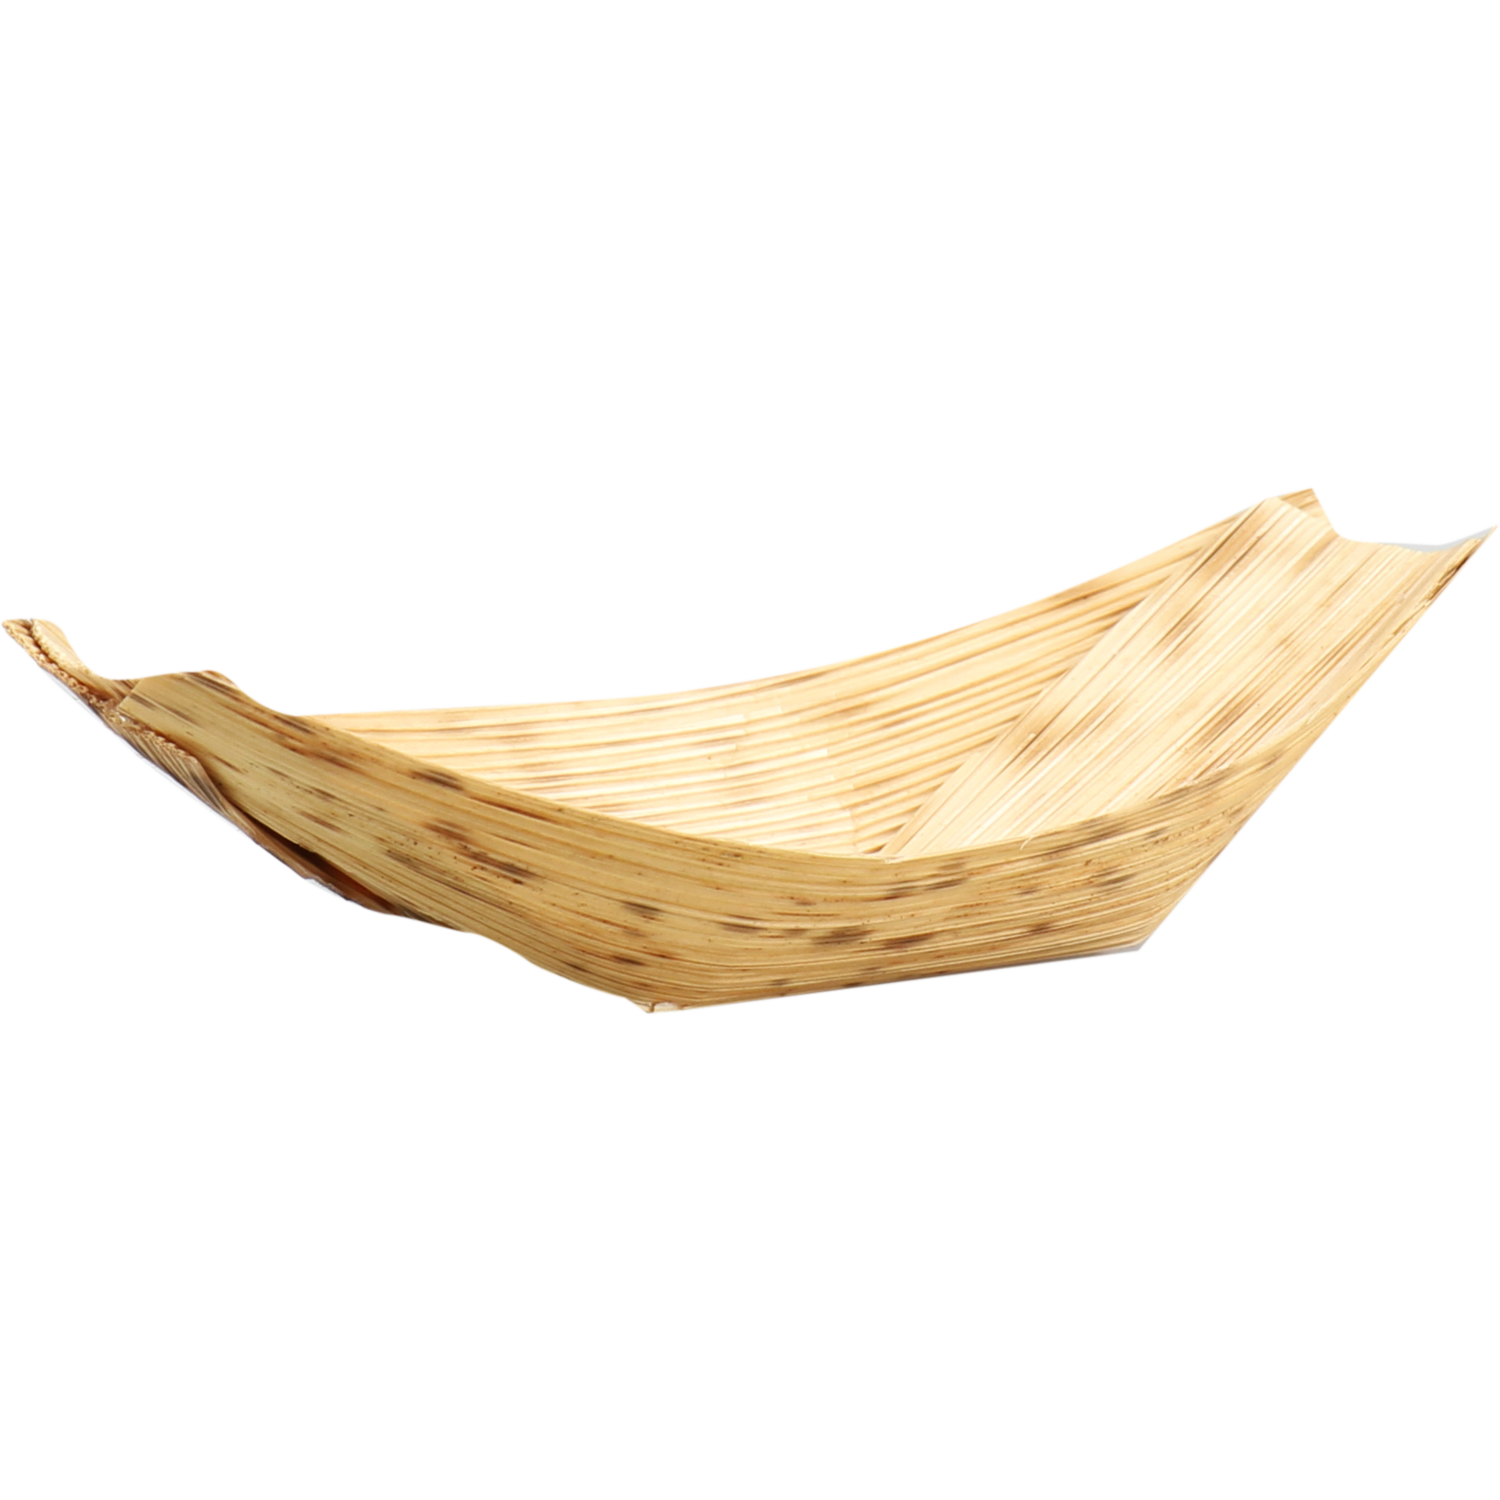 Biodore Amuse, Bamboo, Boat, 10mm, 85mm, 40mm, natural 1